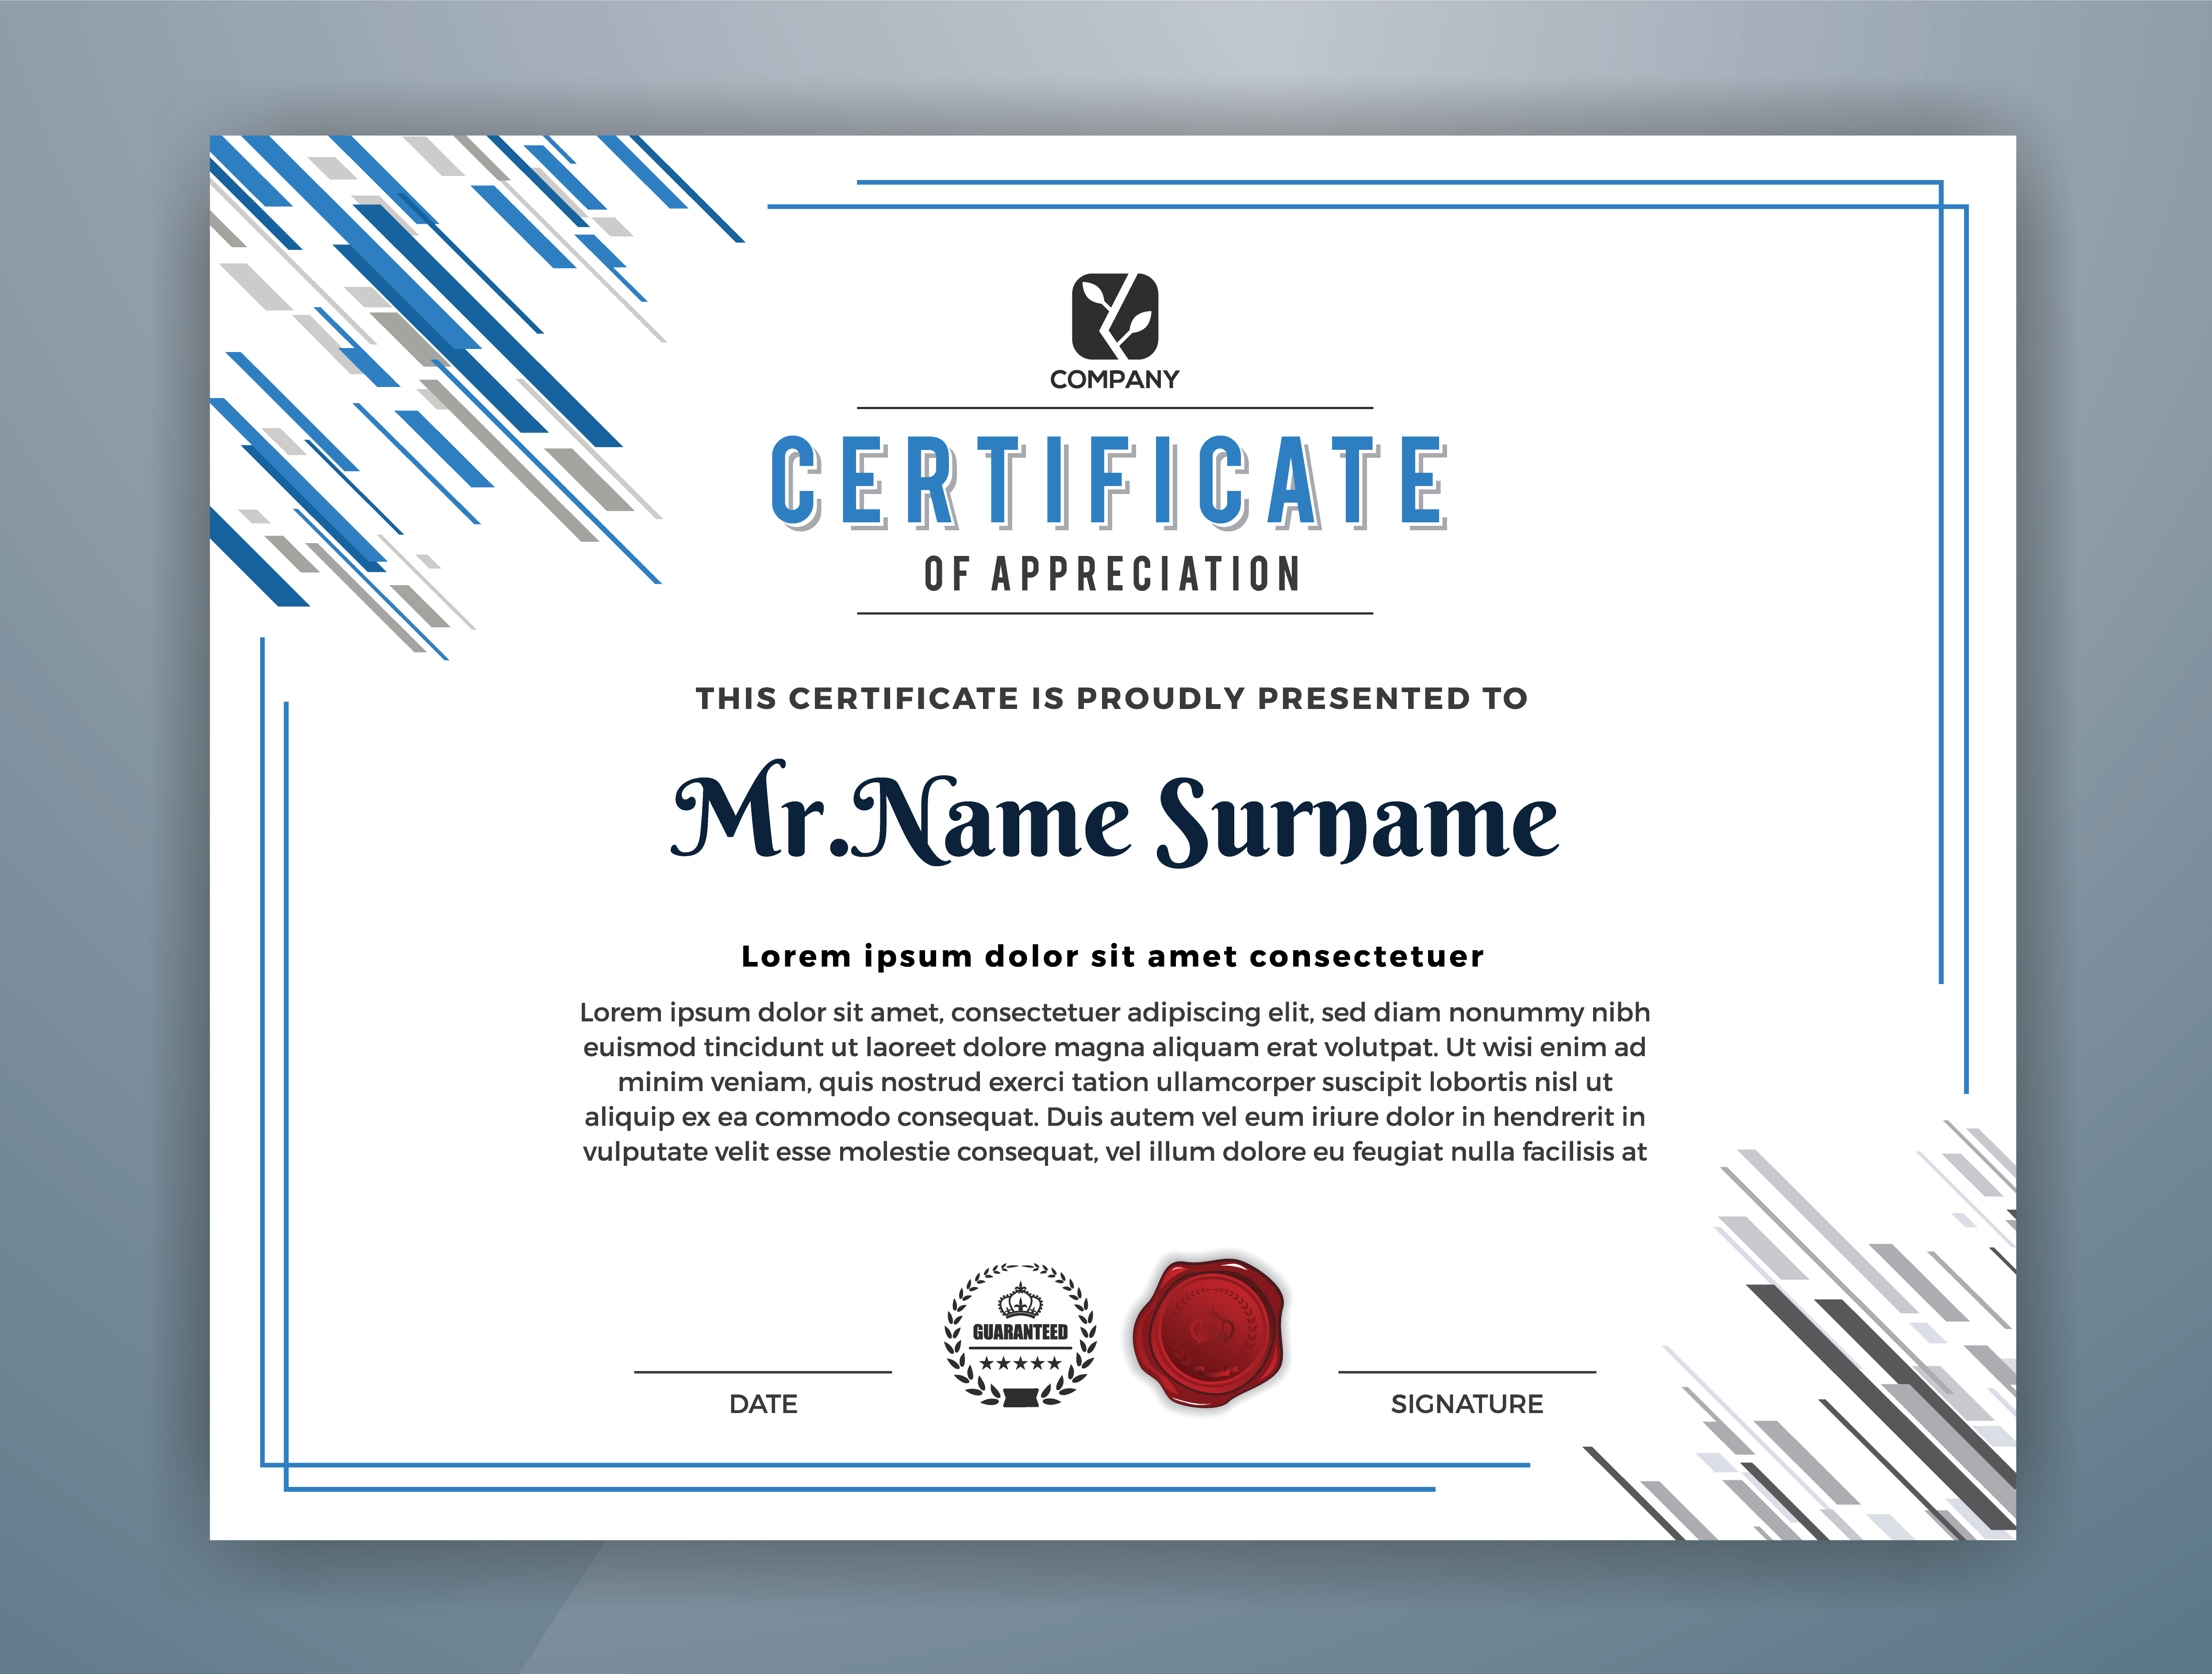 Multipurpose Professional Certificate Template Design. Abstract Blue